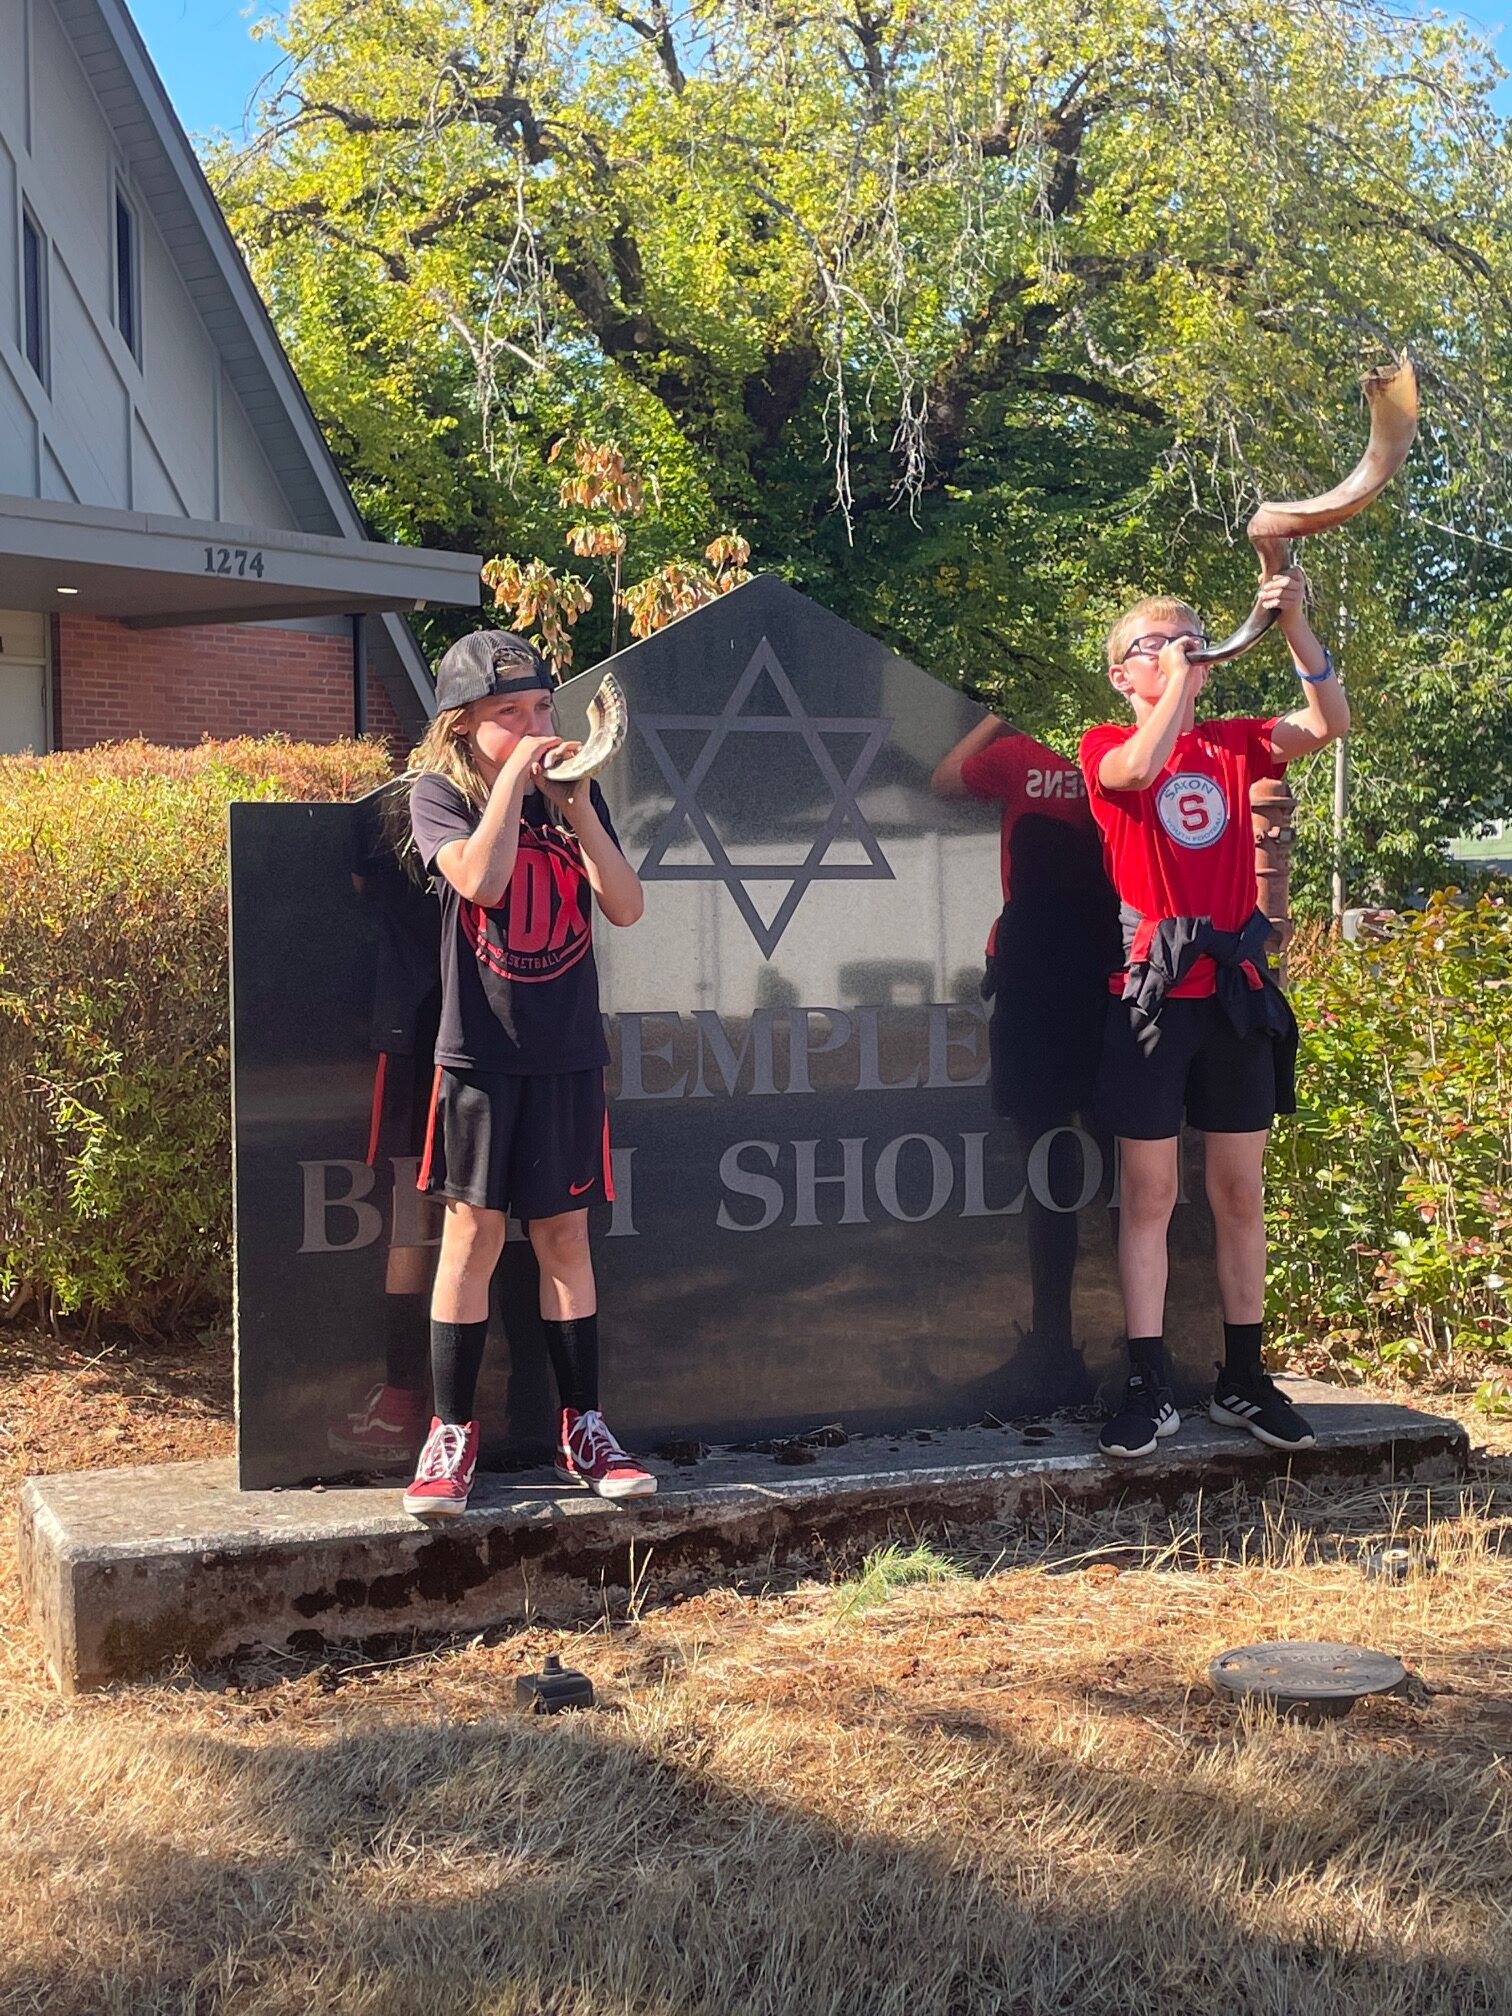 Kids blowing shofar in front of TBS sign